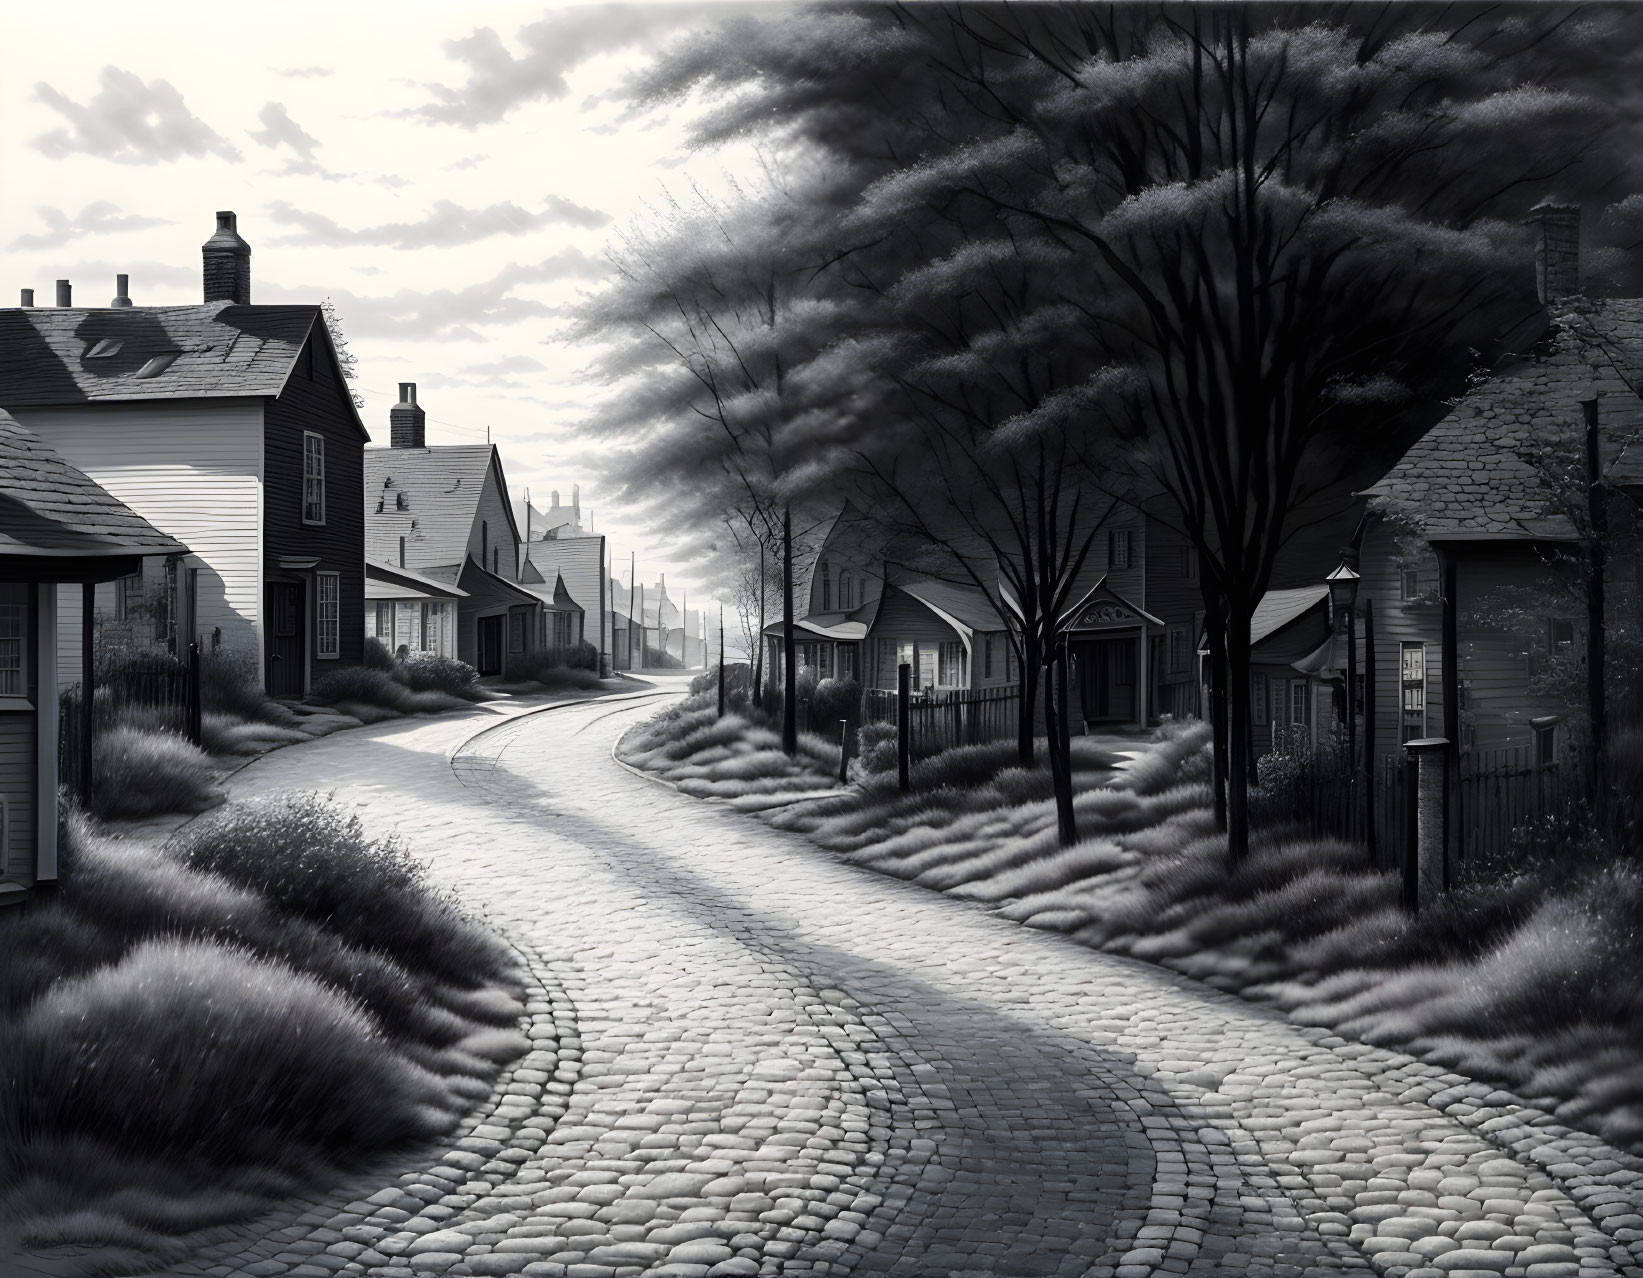 Monochrome image of cobblestone street with houses and windswept trees